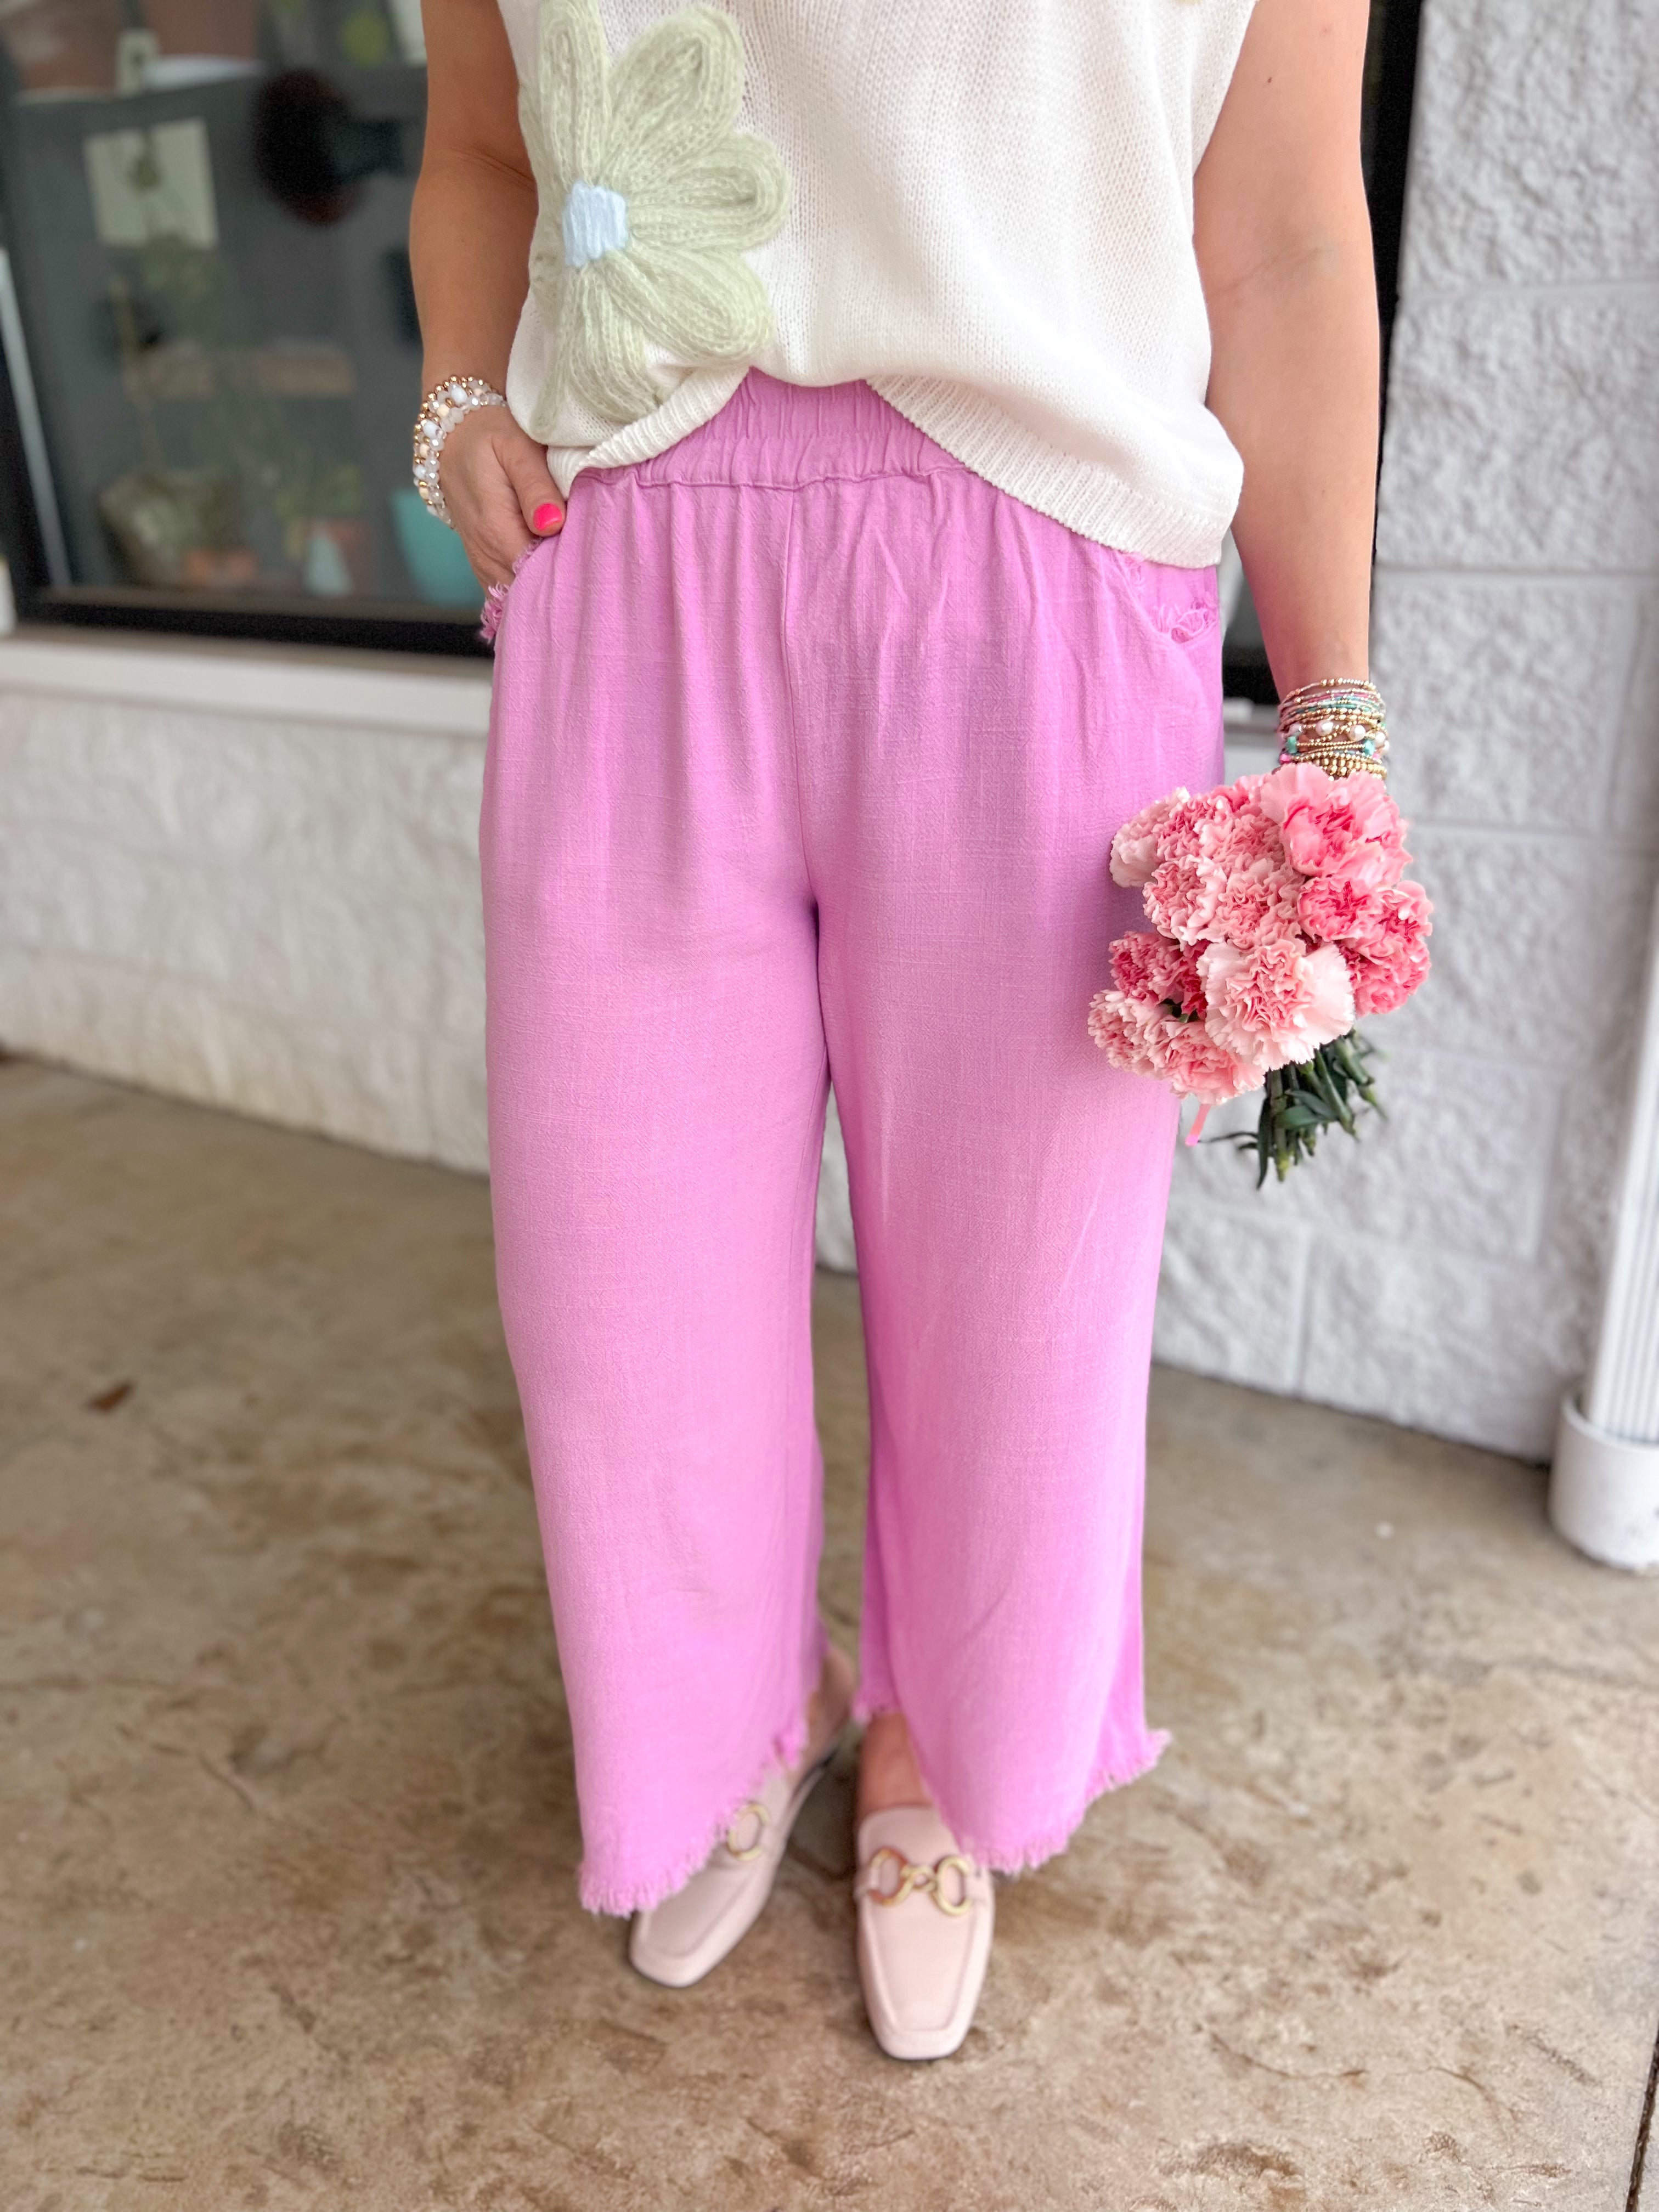 FINAL SALE Berry Sweet Linen Pant-240 Pants-The Lovely Closet-The Lovely Closet, Women's Fashion Boutique in Alexandria, KY